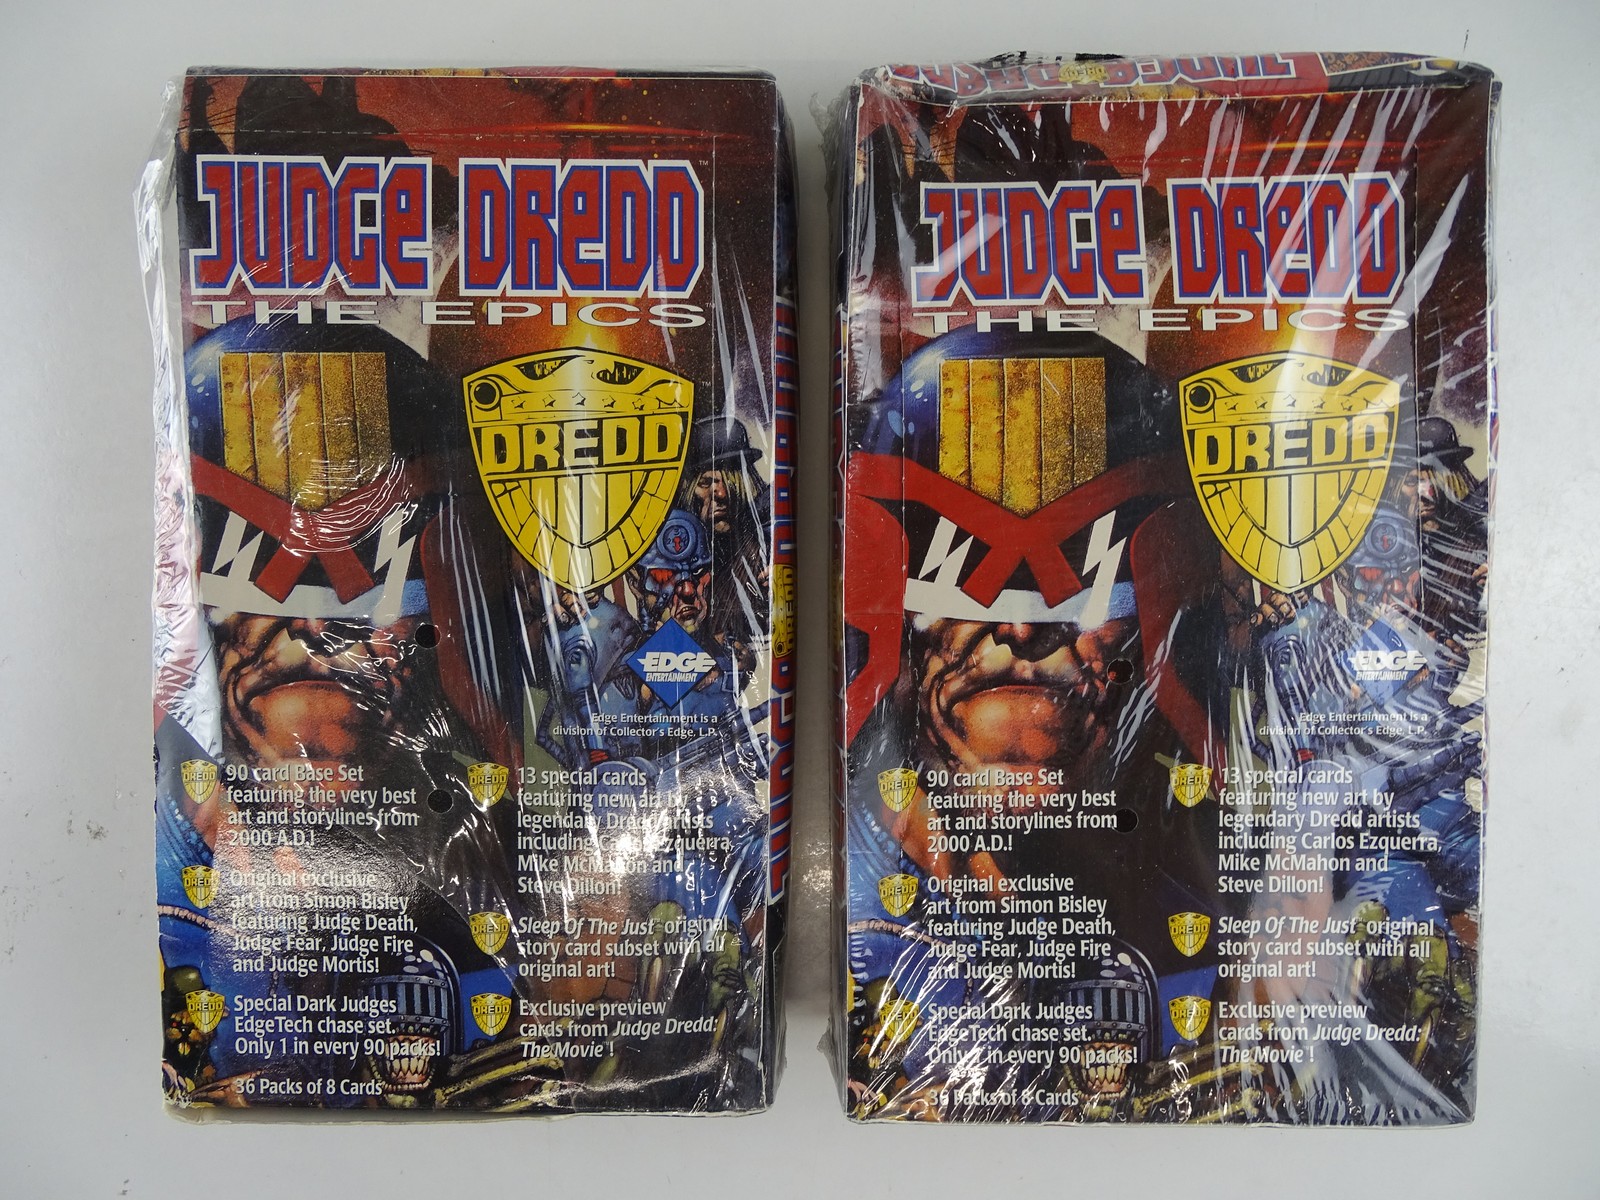 1995 Judge Dredd The Epics set of 9 Sleep of the Just chase insert cards 1-9 